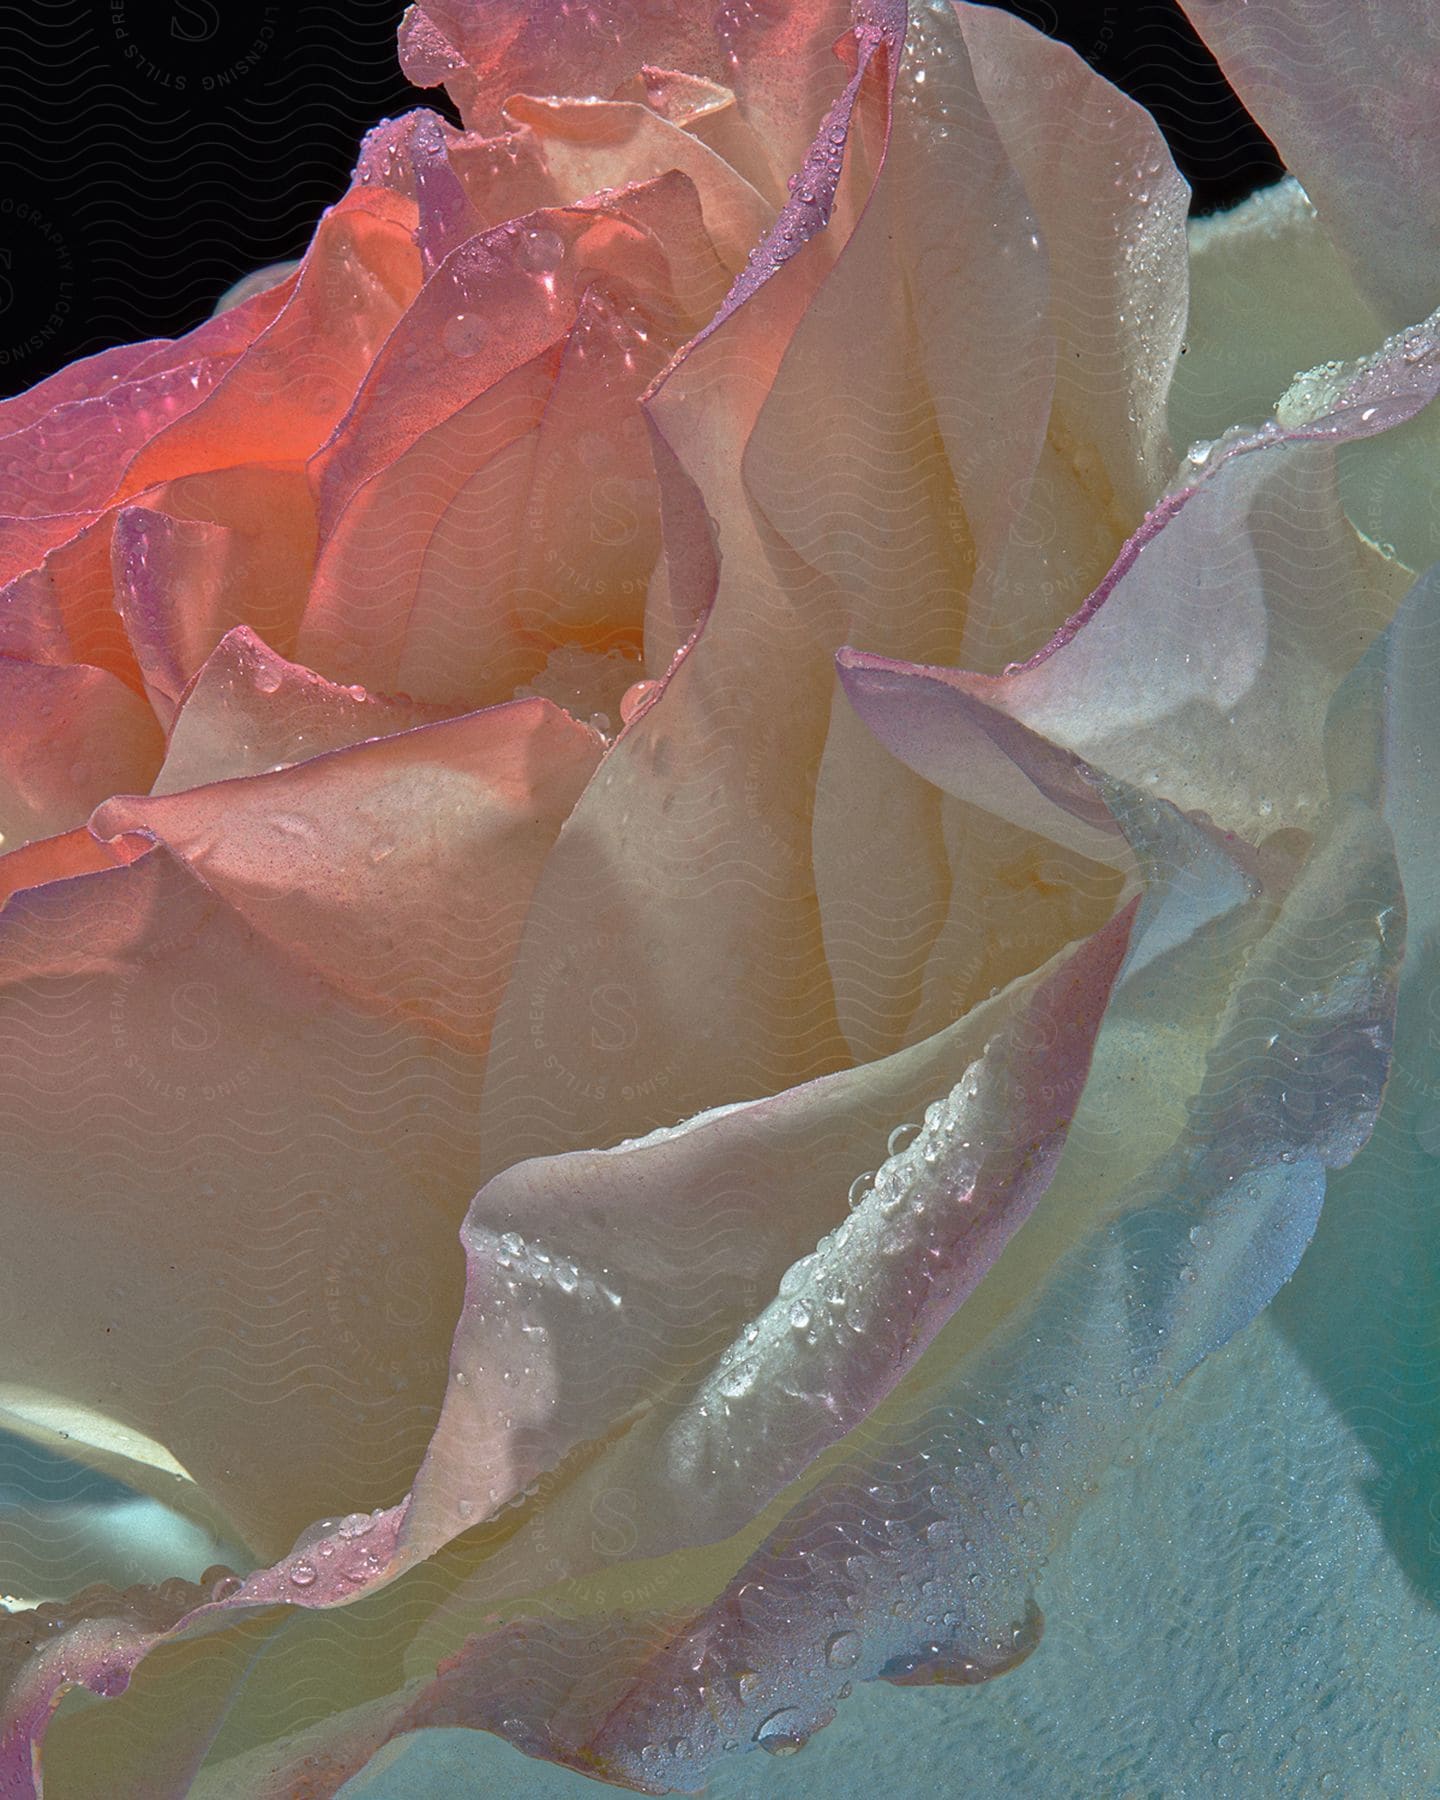 A close-up photo of a pink and white rose bud with dewdrops clinging to its petals.